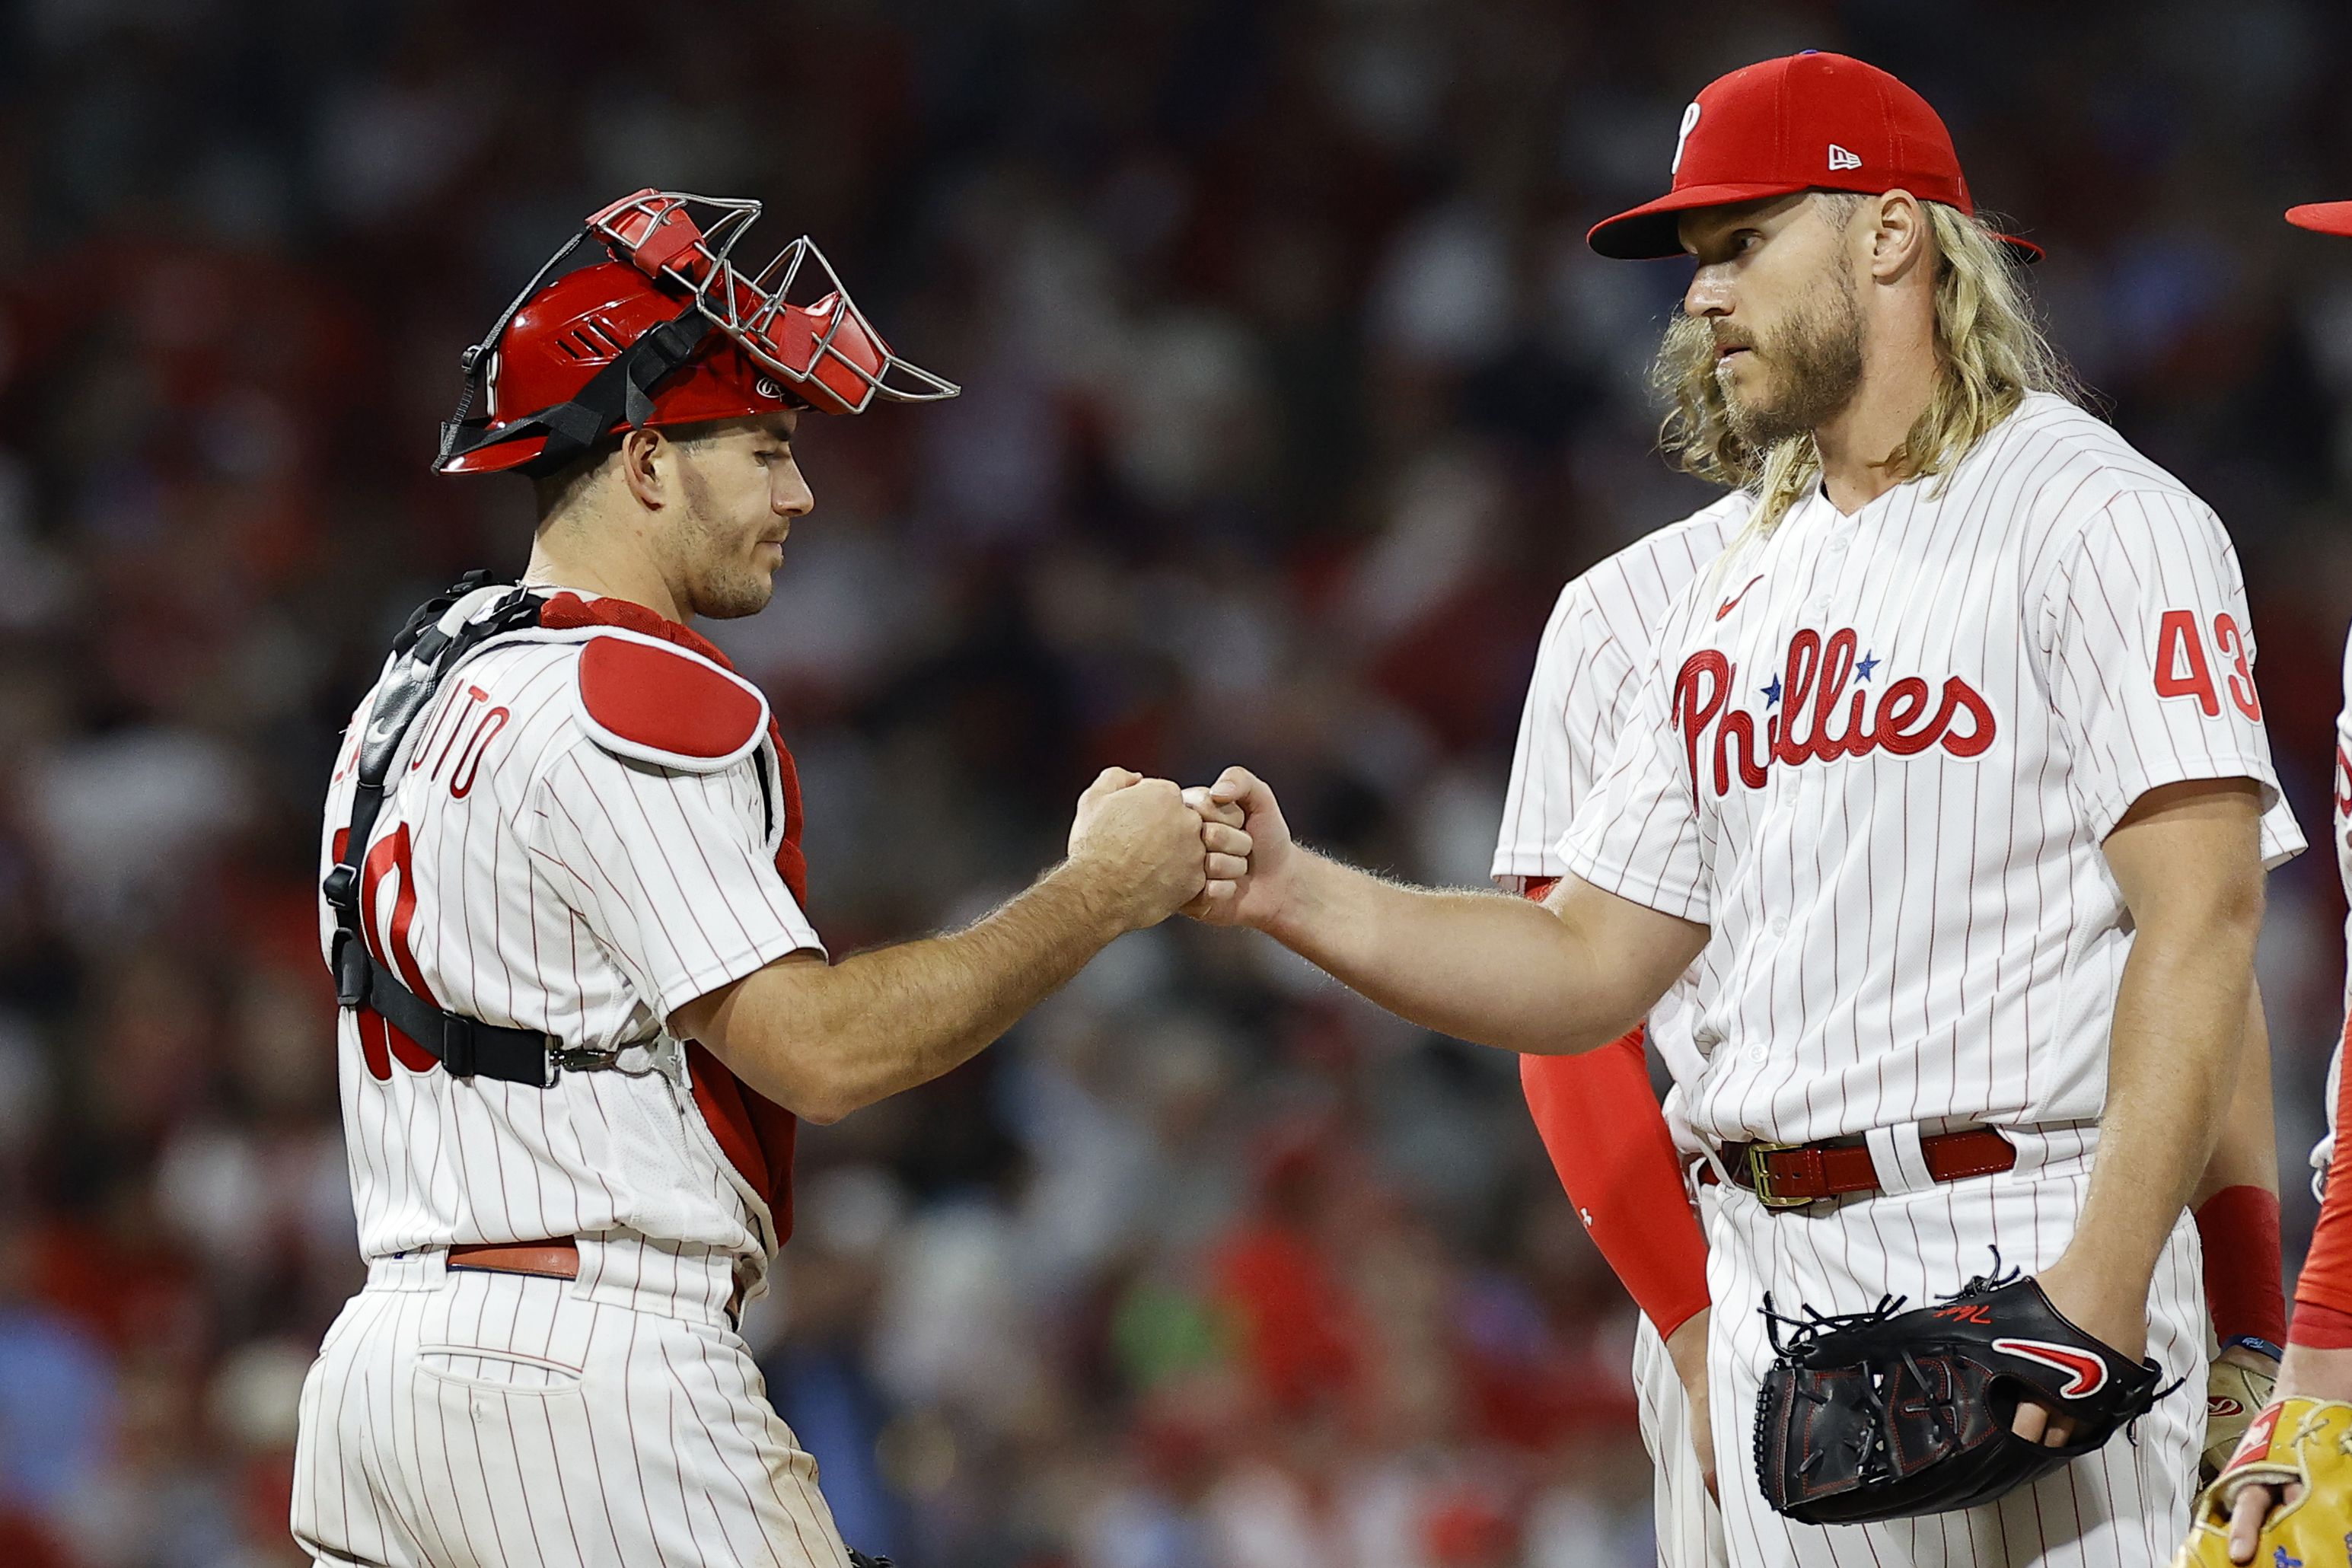 Phillies – Padres: Rhys Hoskins skips after home run, fans love it